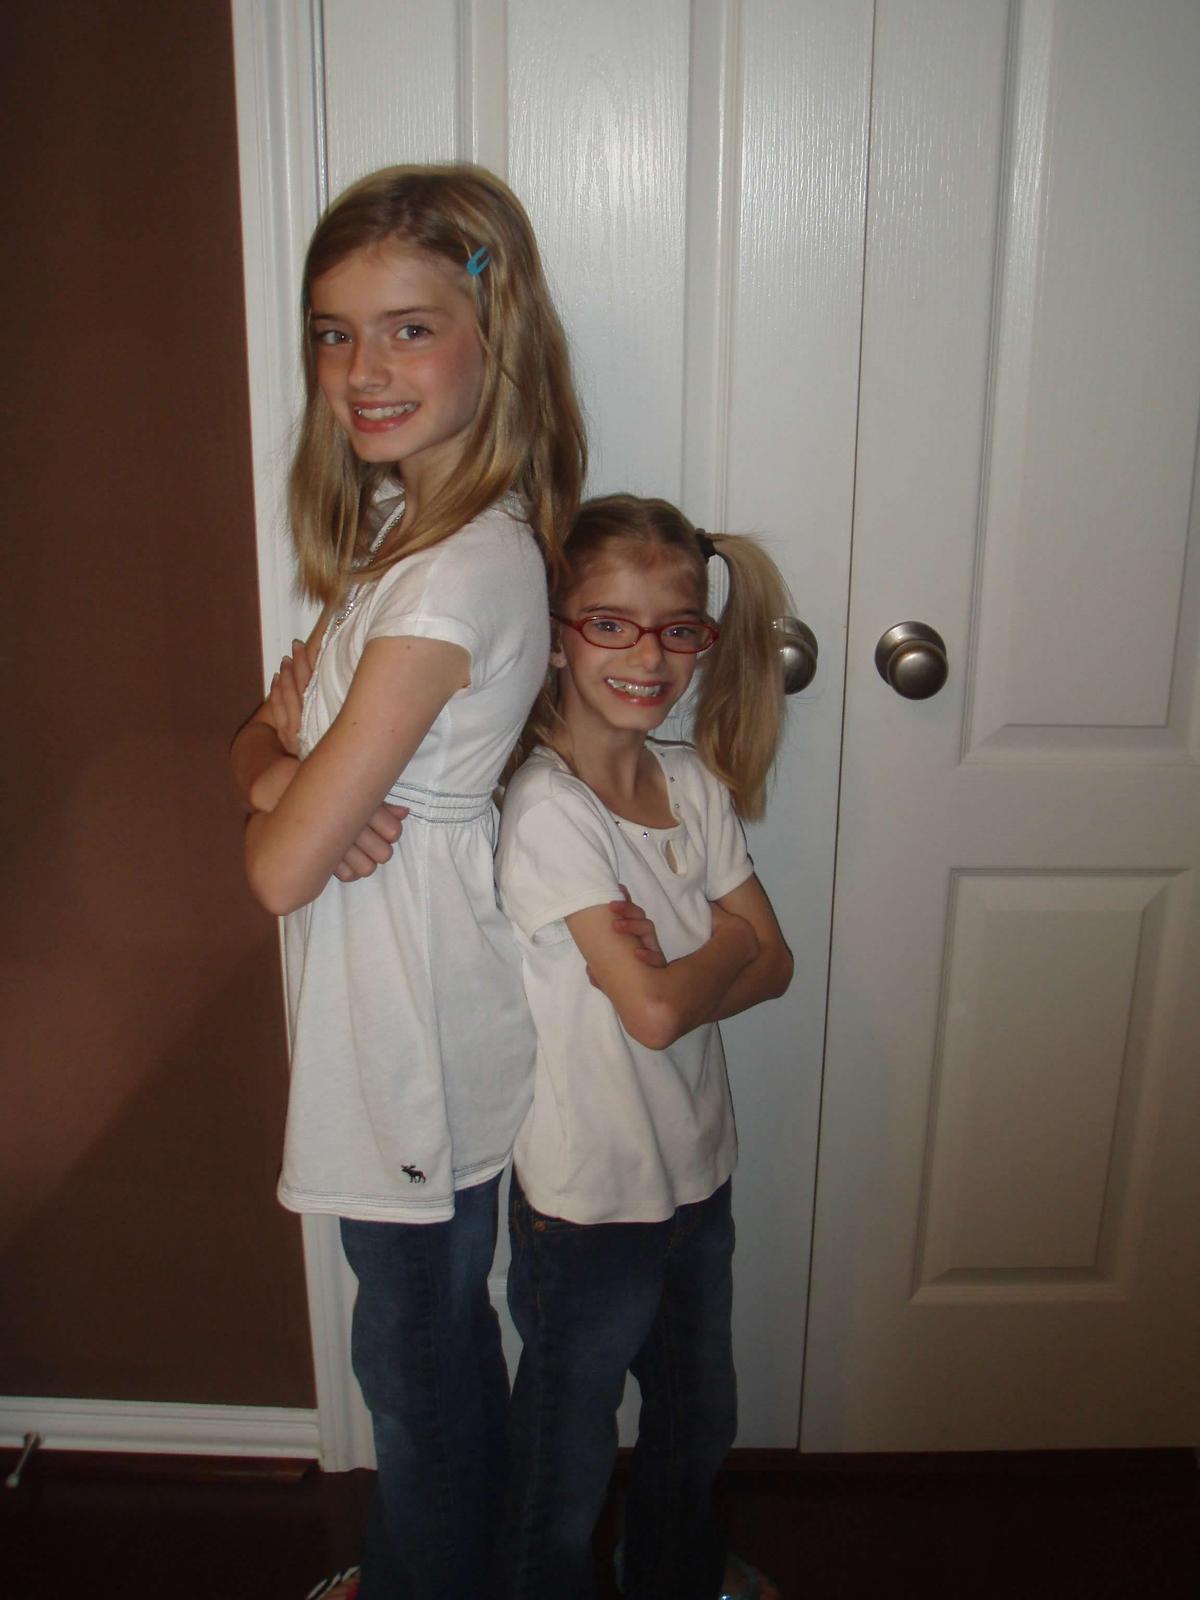 The twins at 10 years old. (Courtesy of <a href="https://www.facebook.com/officialChrissyBernal">Chrissy Bernal</a>)